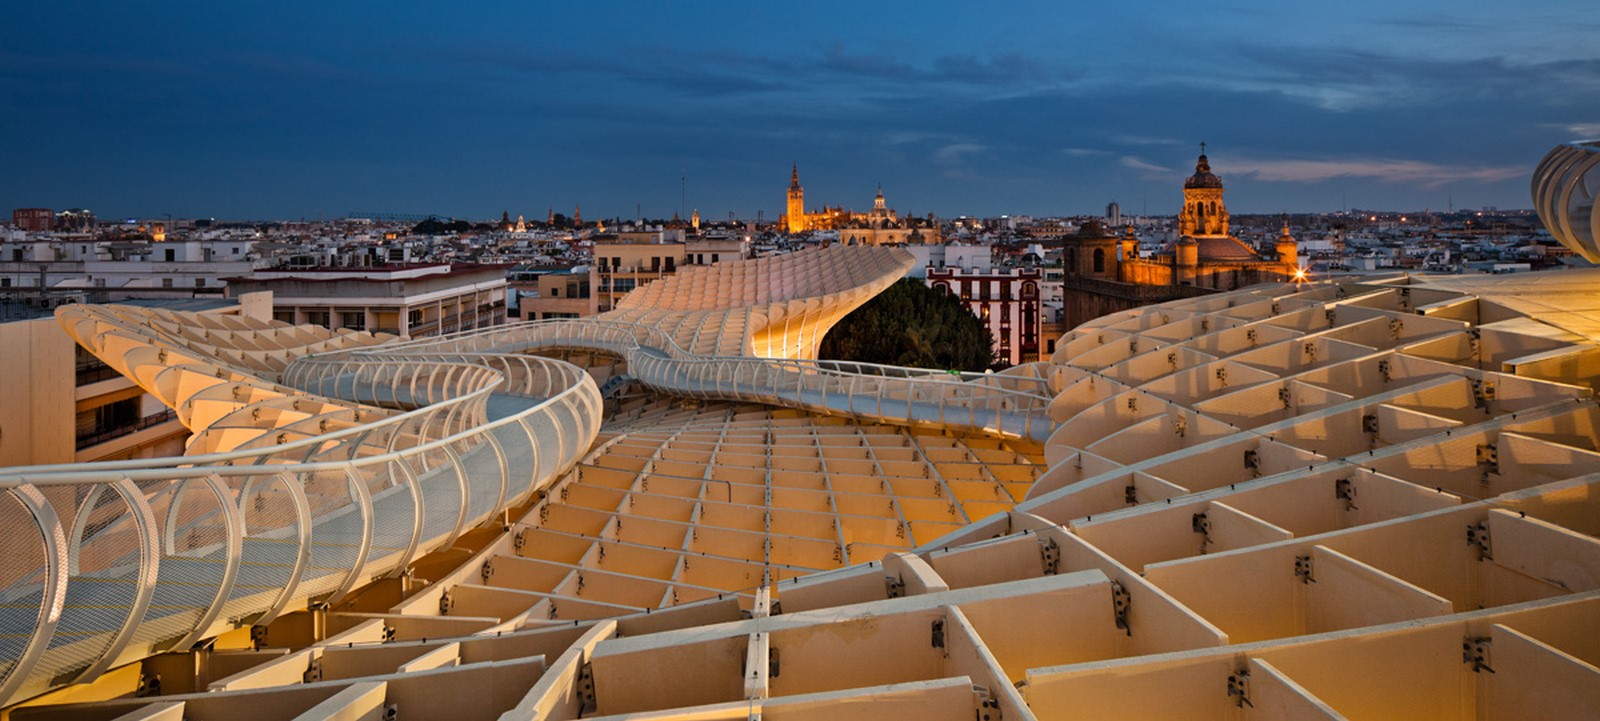 Architecture in Spain: 20 Great Buildings you should visit - Sheet9